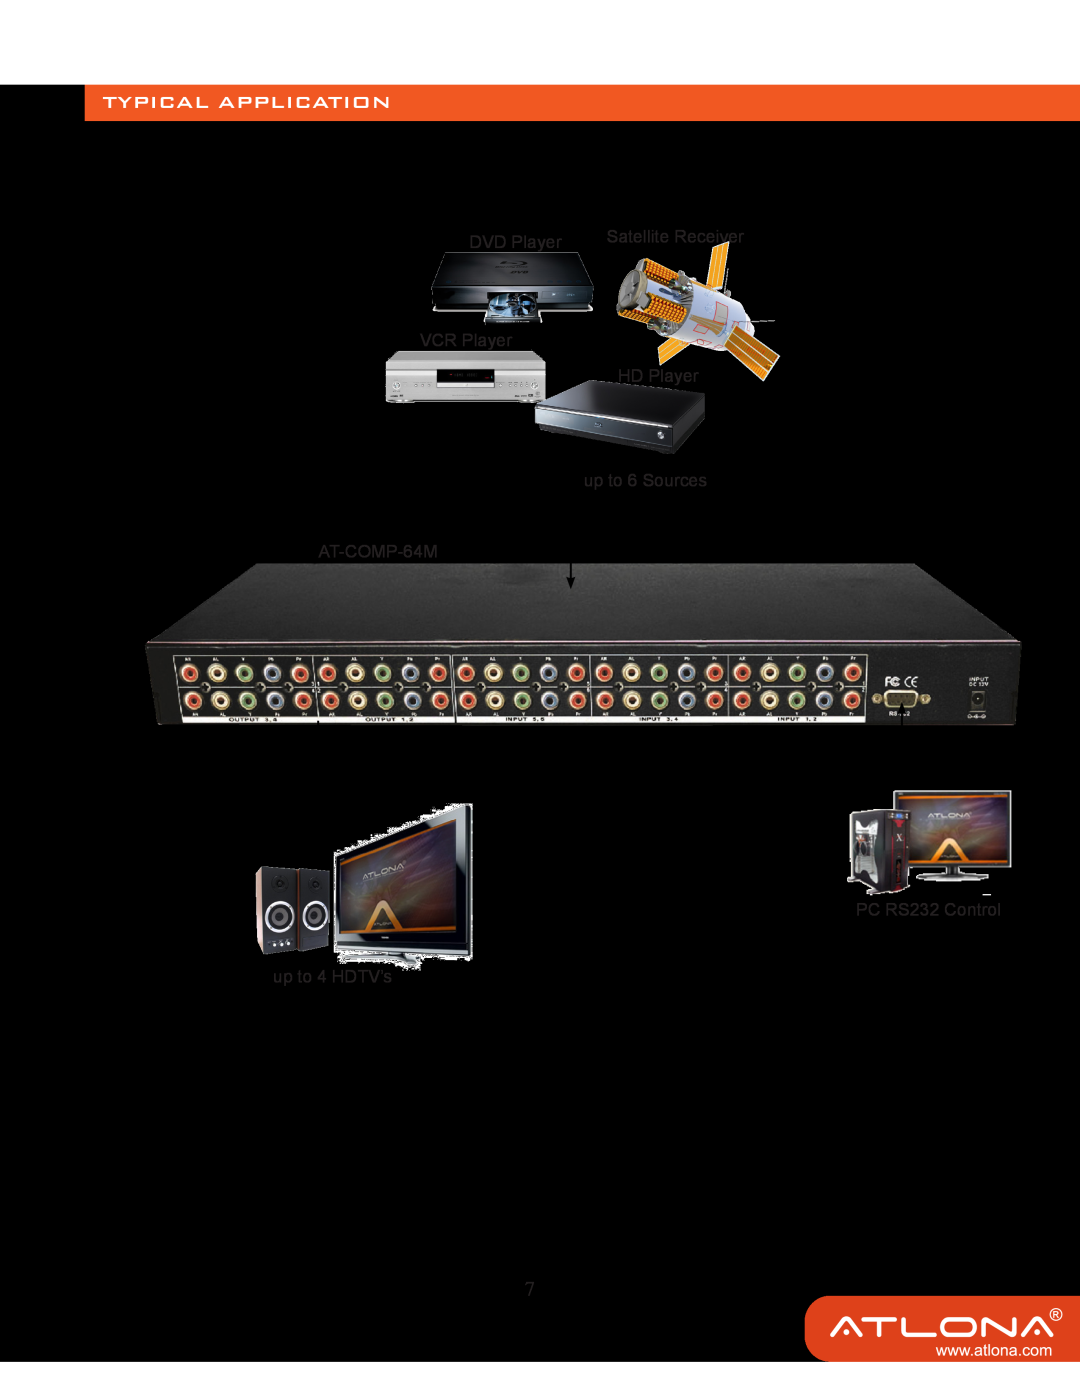 Atlona 64 M user manual Typical Application, DVD Player, Satellite Receiver, VCR Player AT-COMP-64M up to 4 HDTV’s 